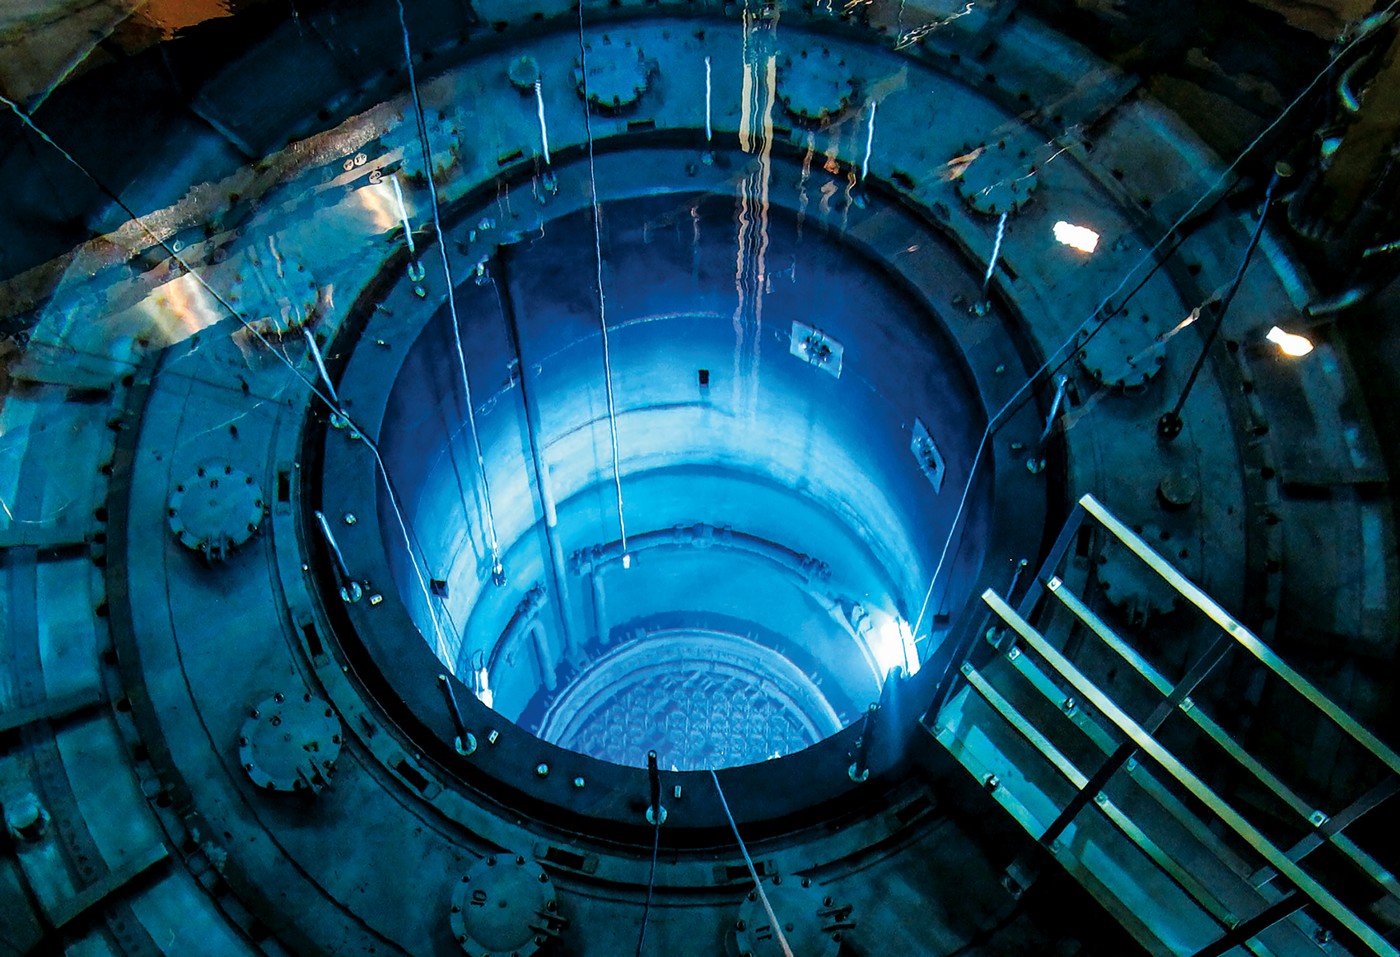 Combating the aging nuclear reactors